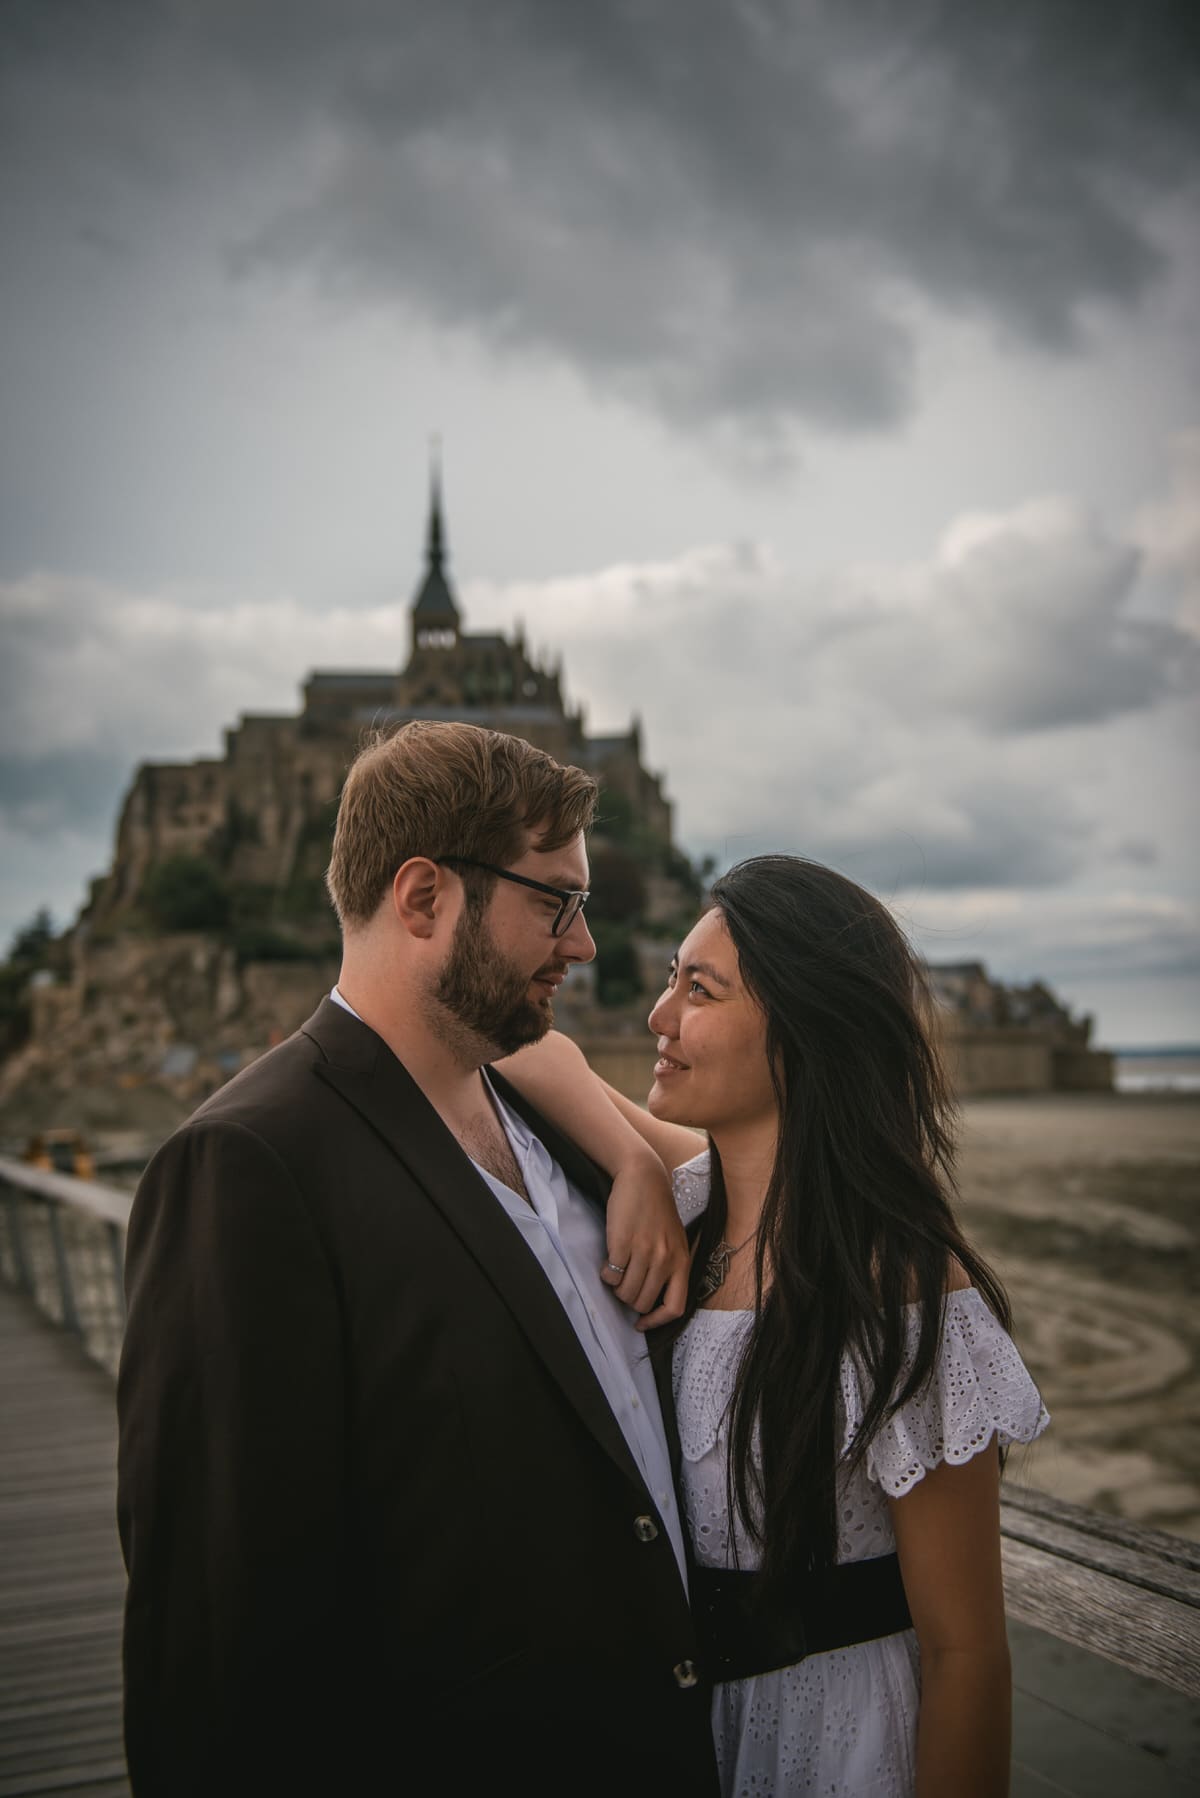 Day-after photoshoot of a couple after their elopement in Normandy